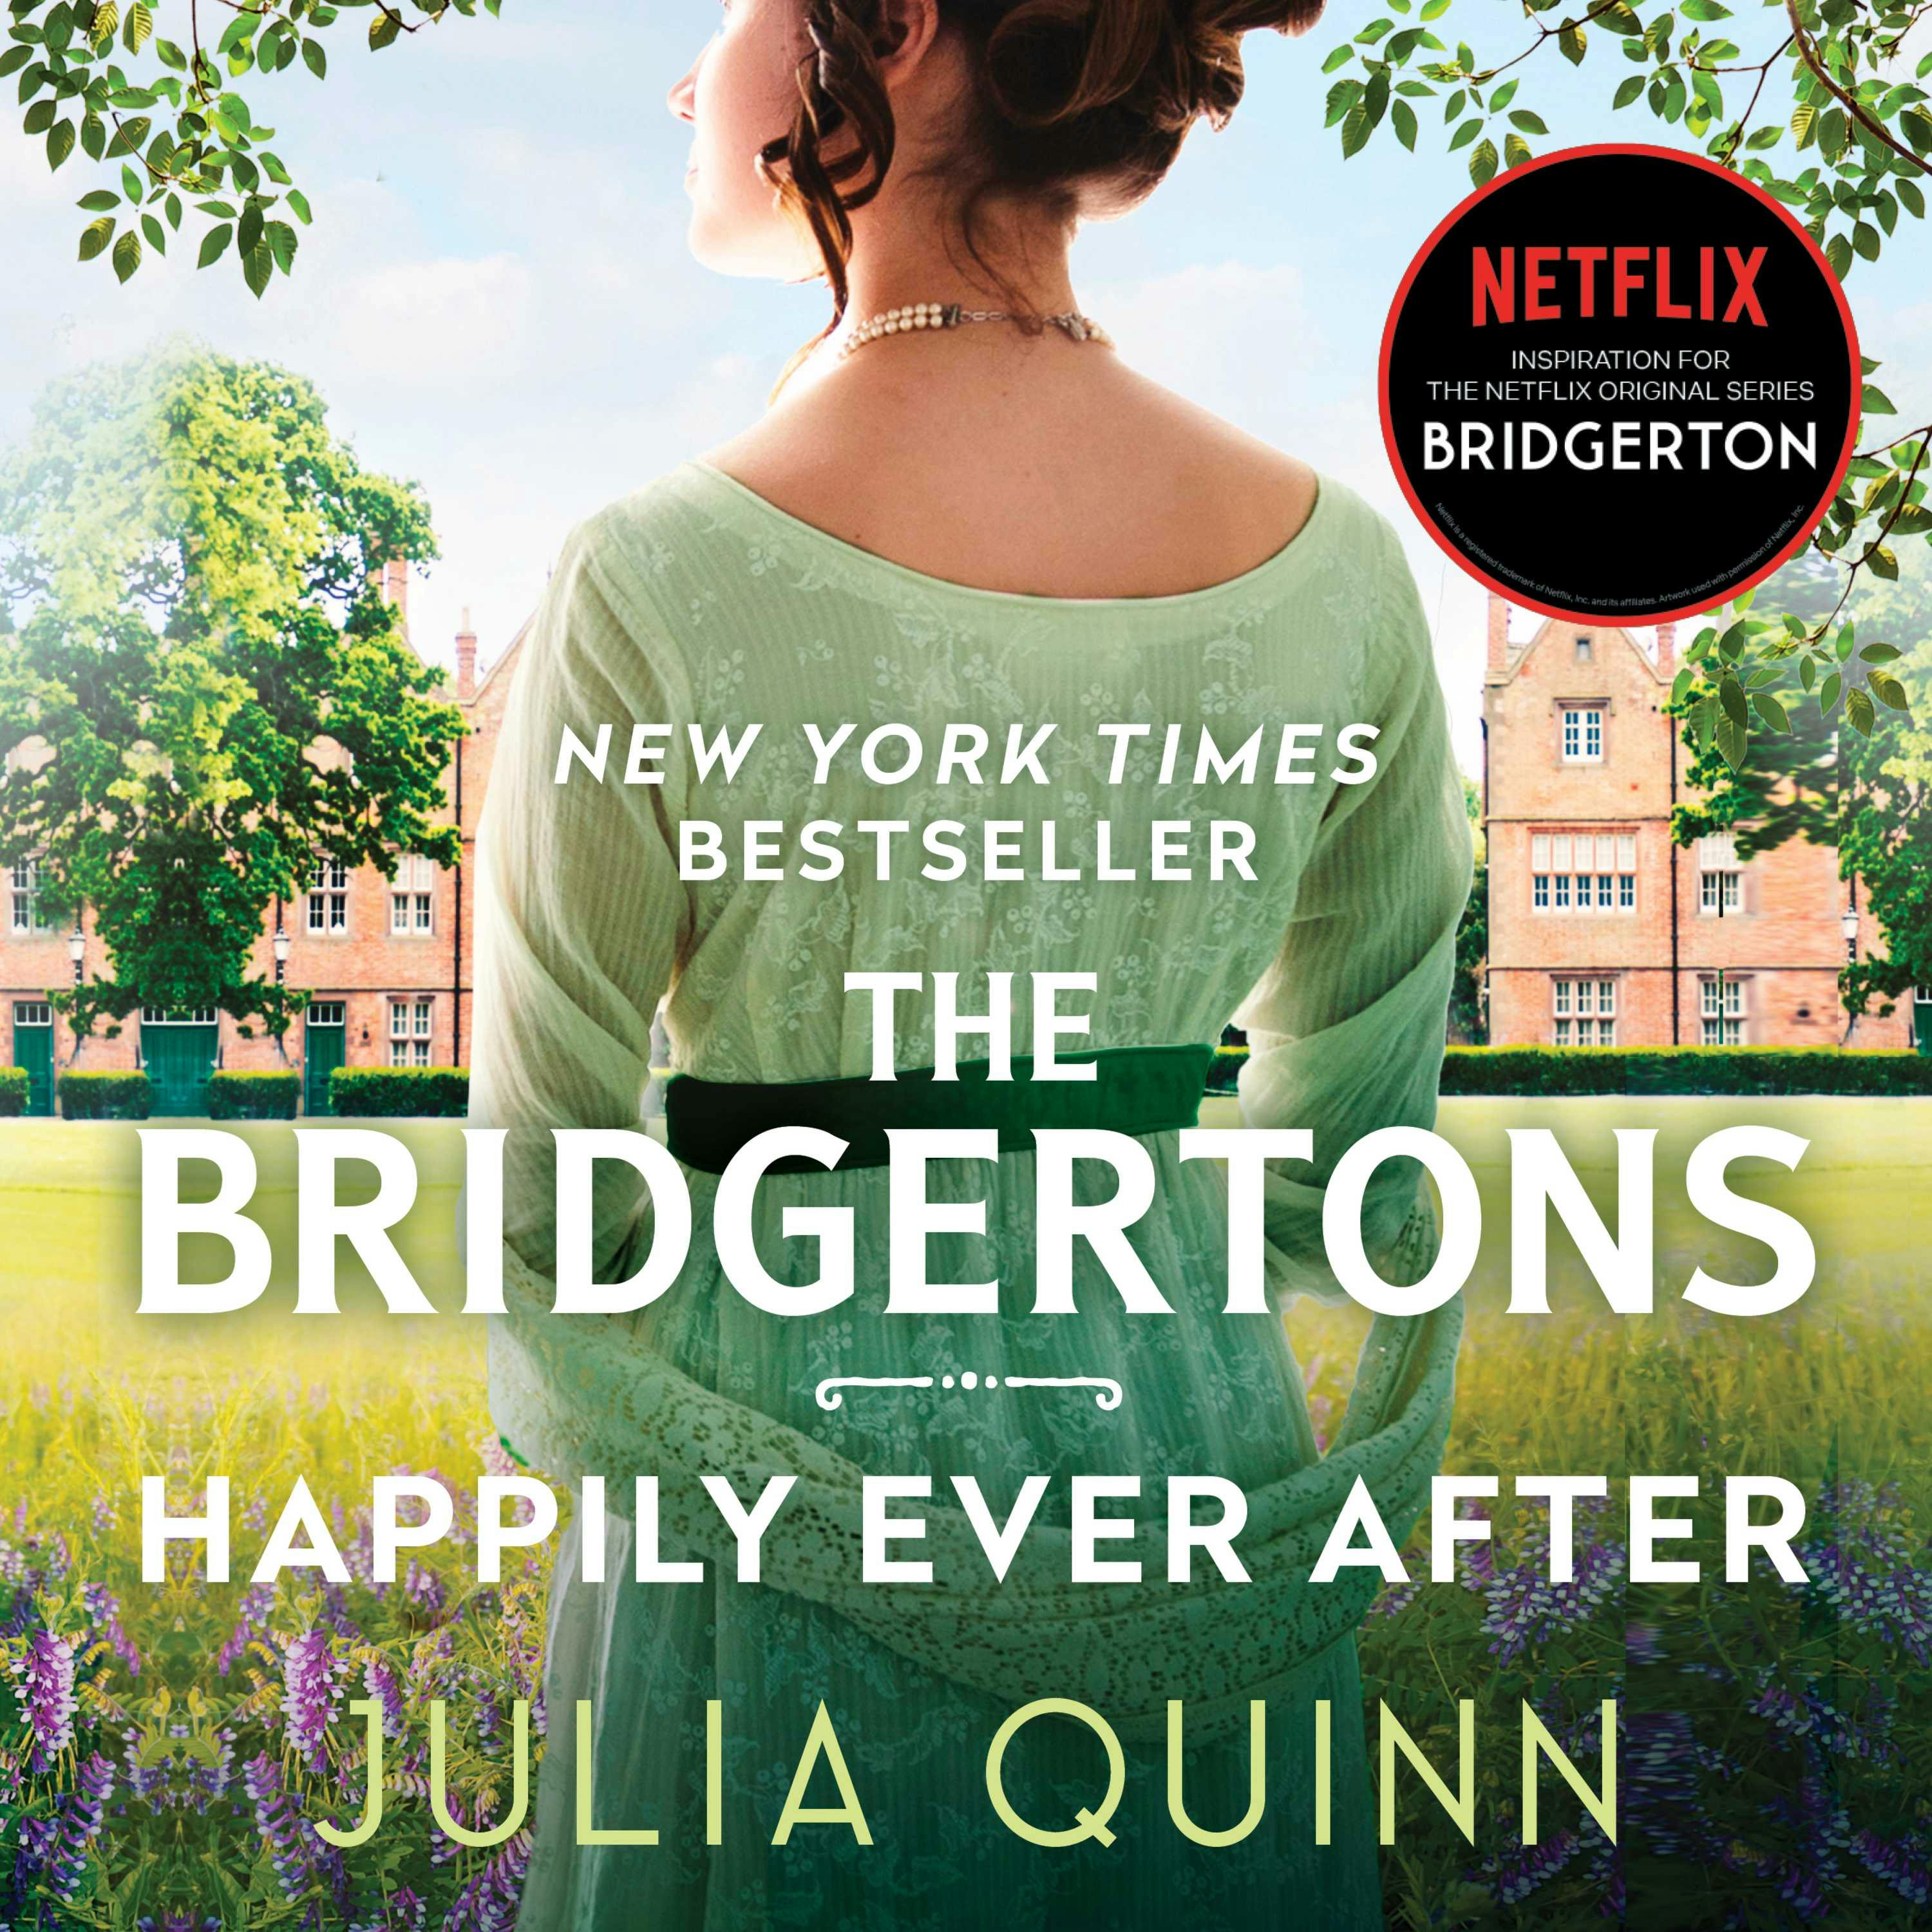 The Bridgertons: Happily Ever After - undefined